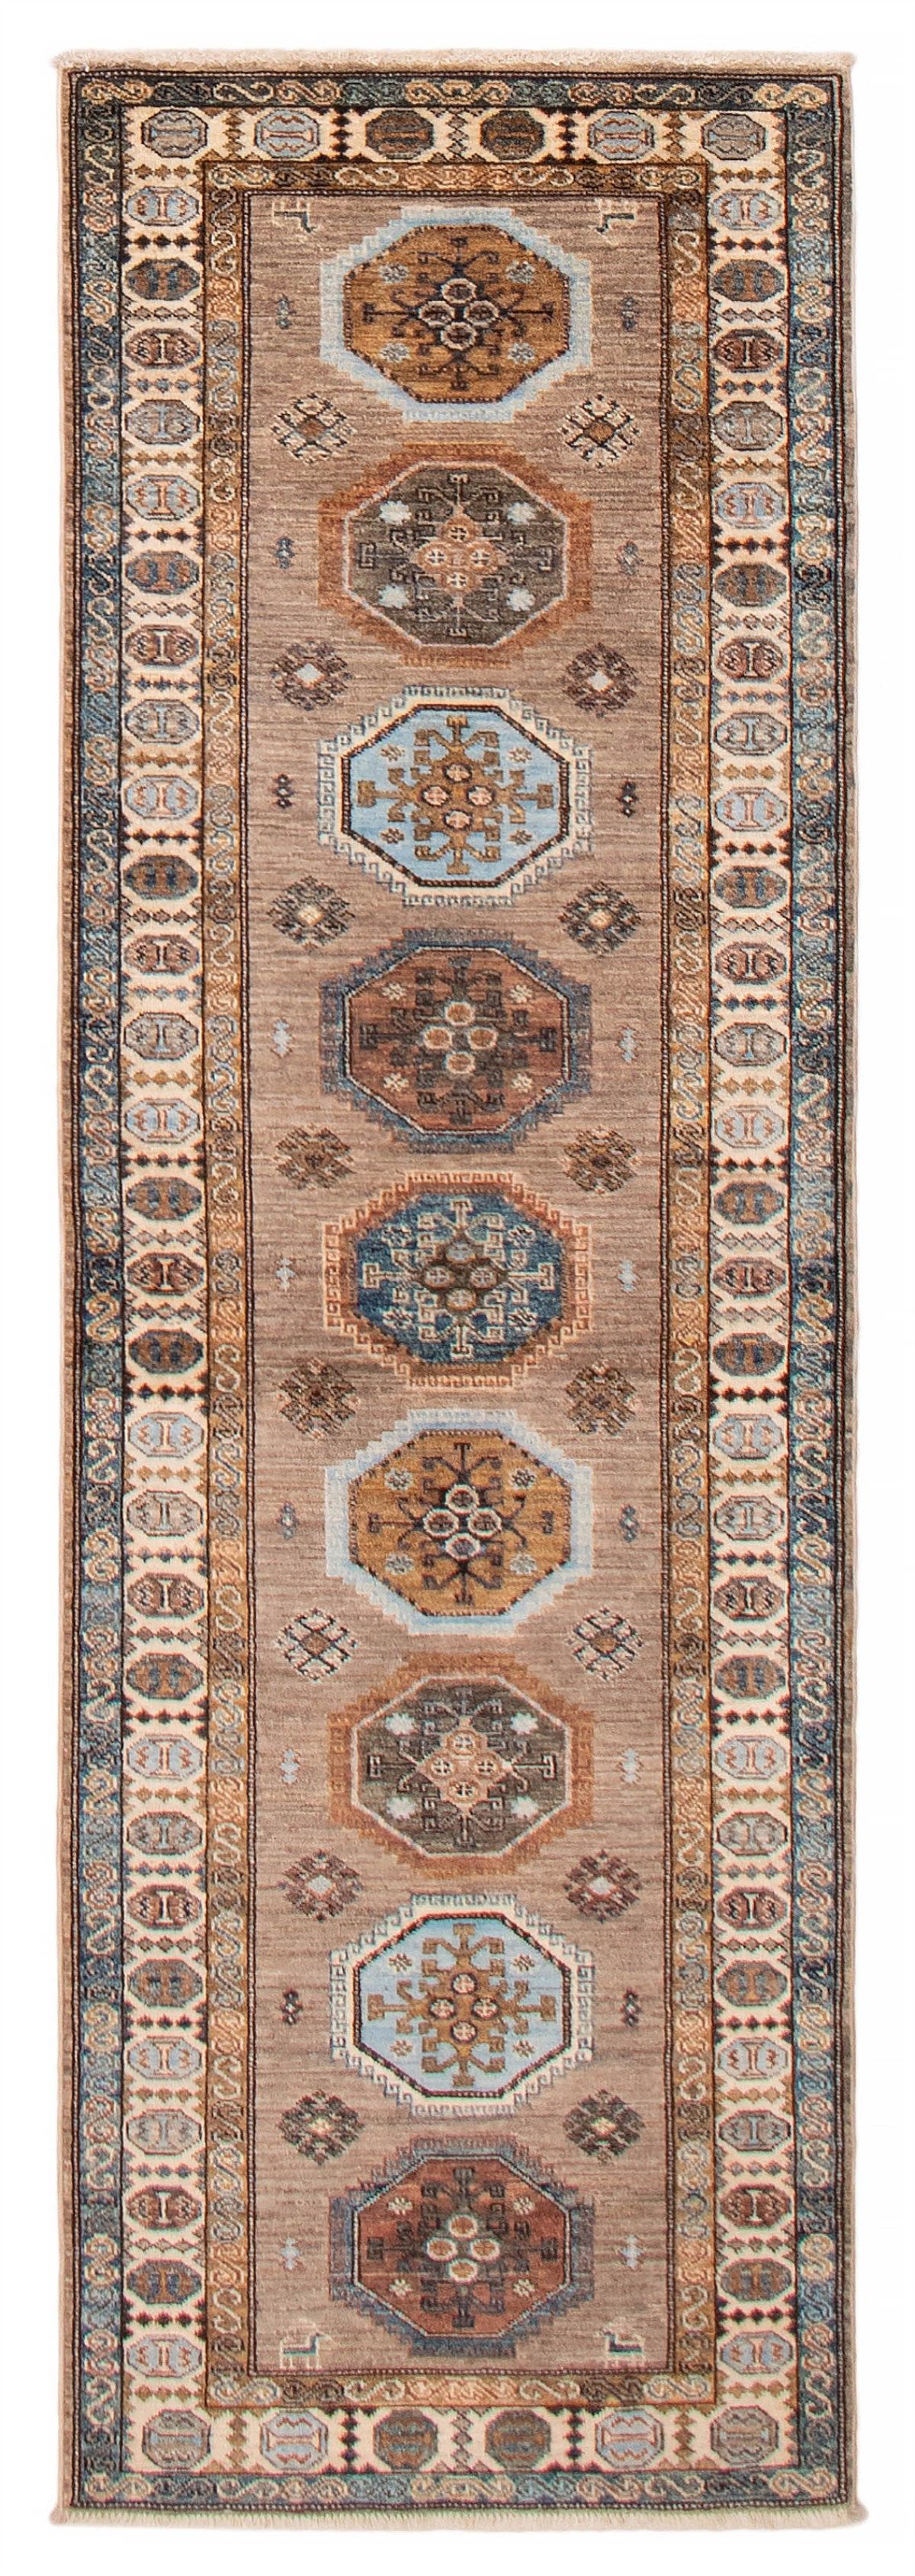 3x5 Ft. Wool & Cotton Rug Turkish Mat Washable Runner Gypsy Carpet Utility  Rugs